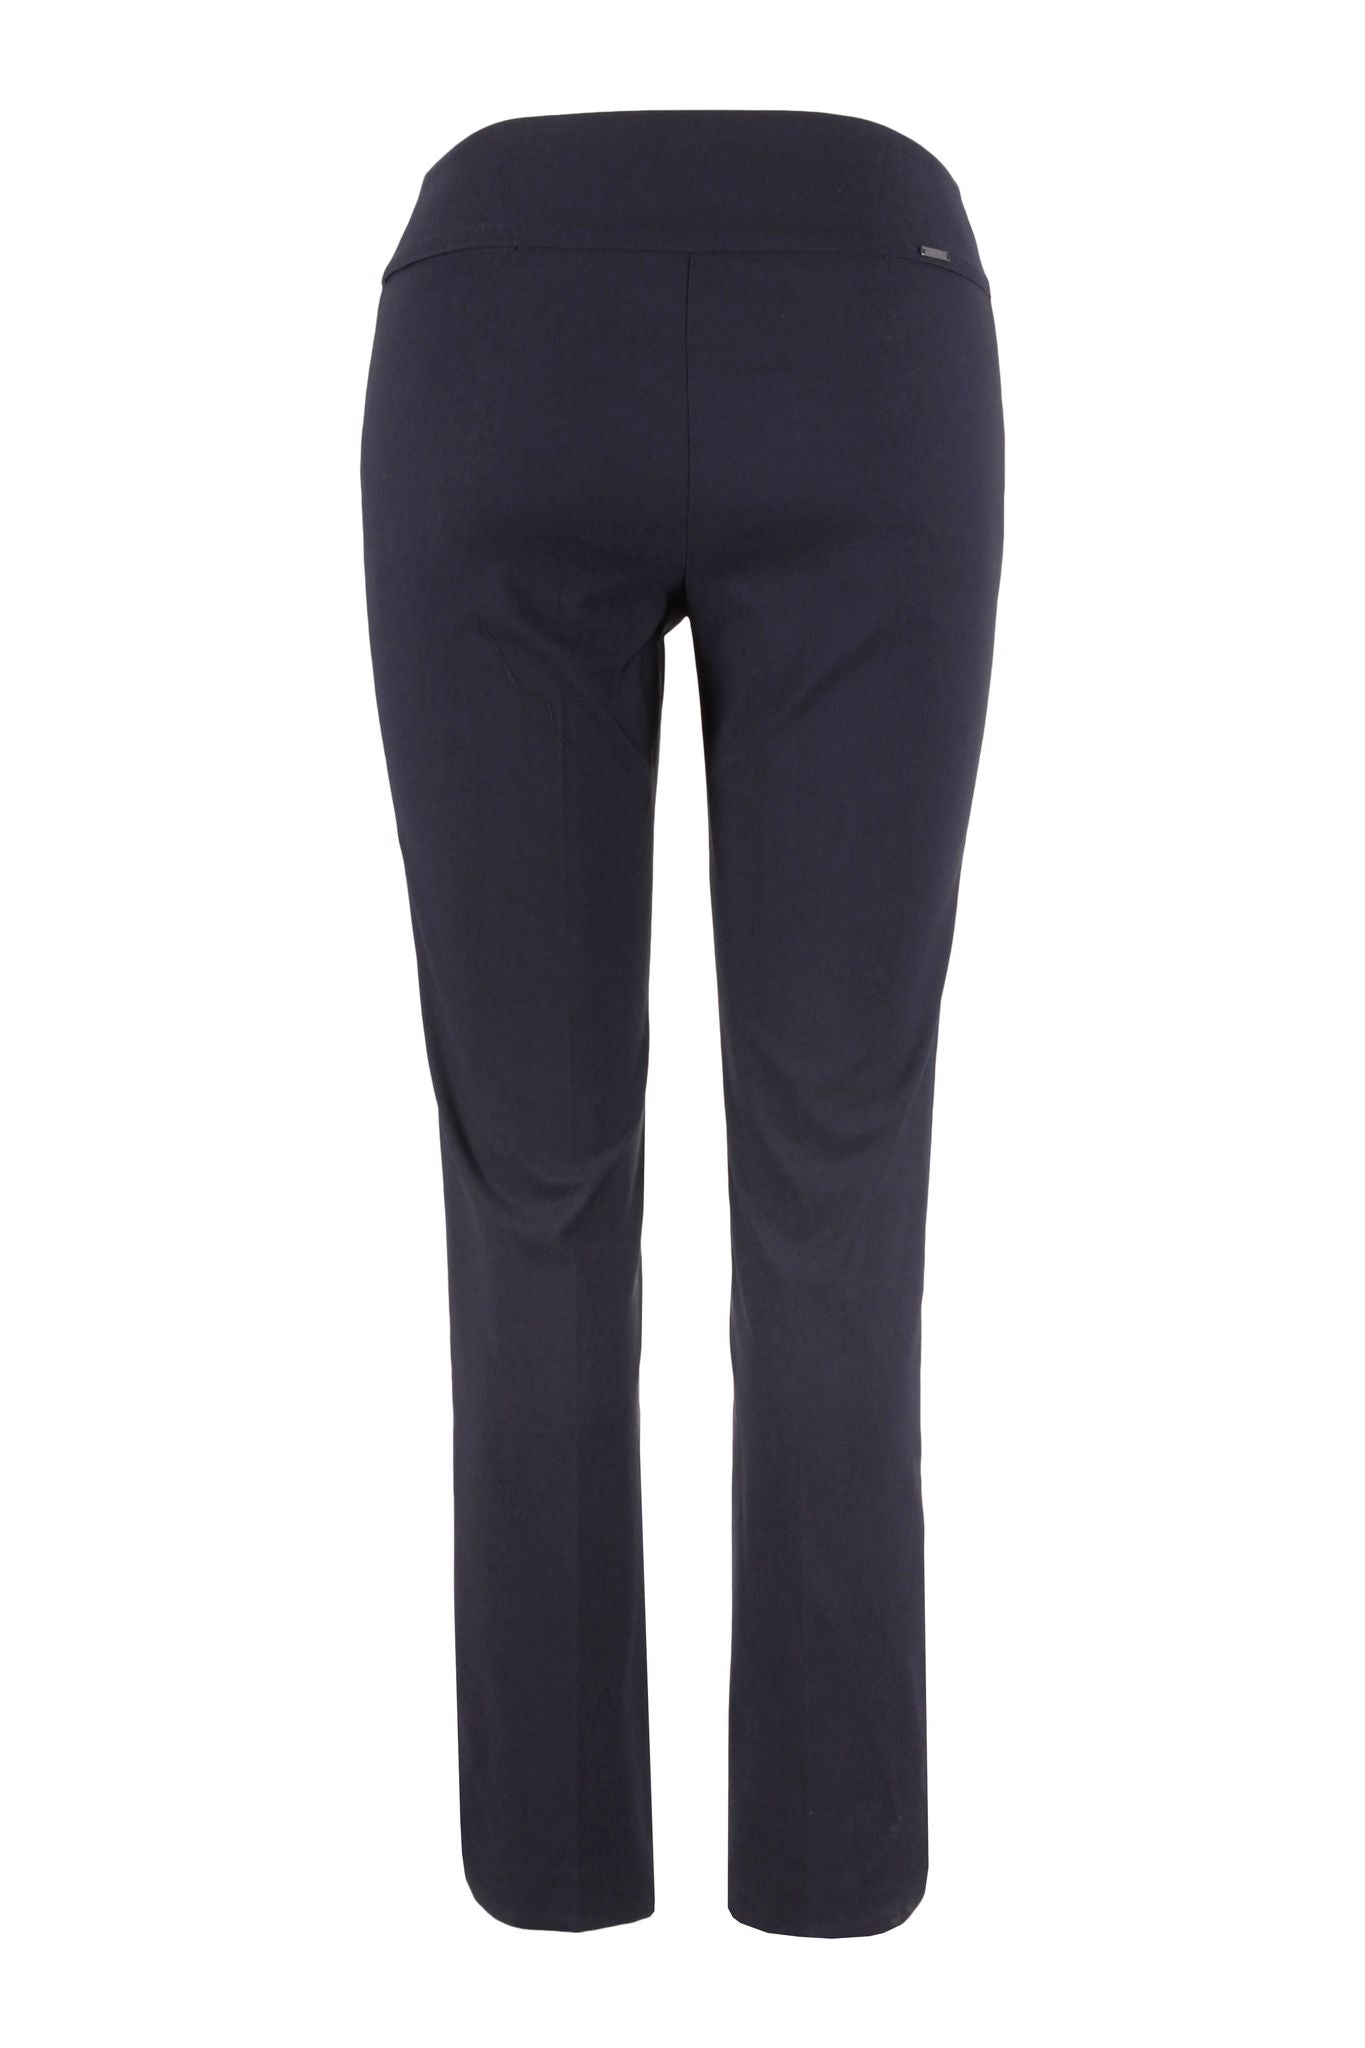 UP! Slim Ankle Pants Navy - 65027UP